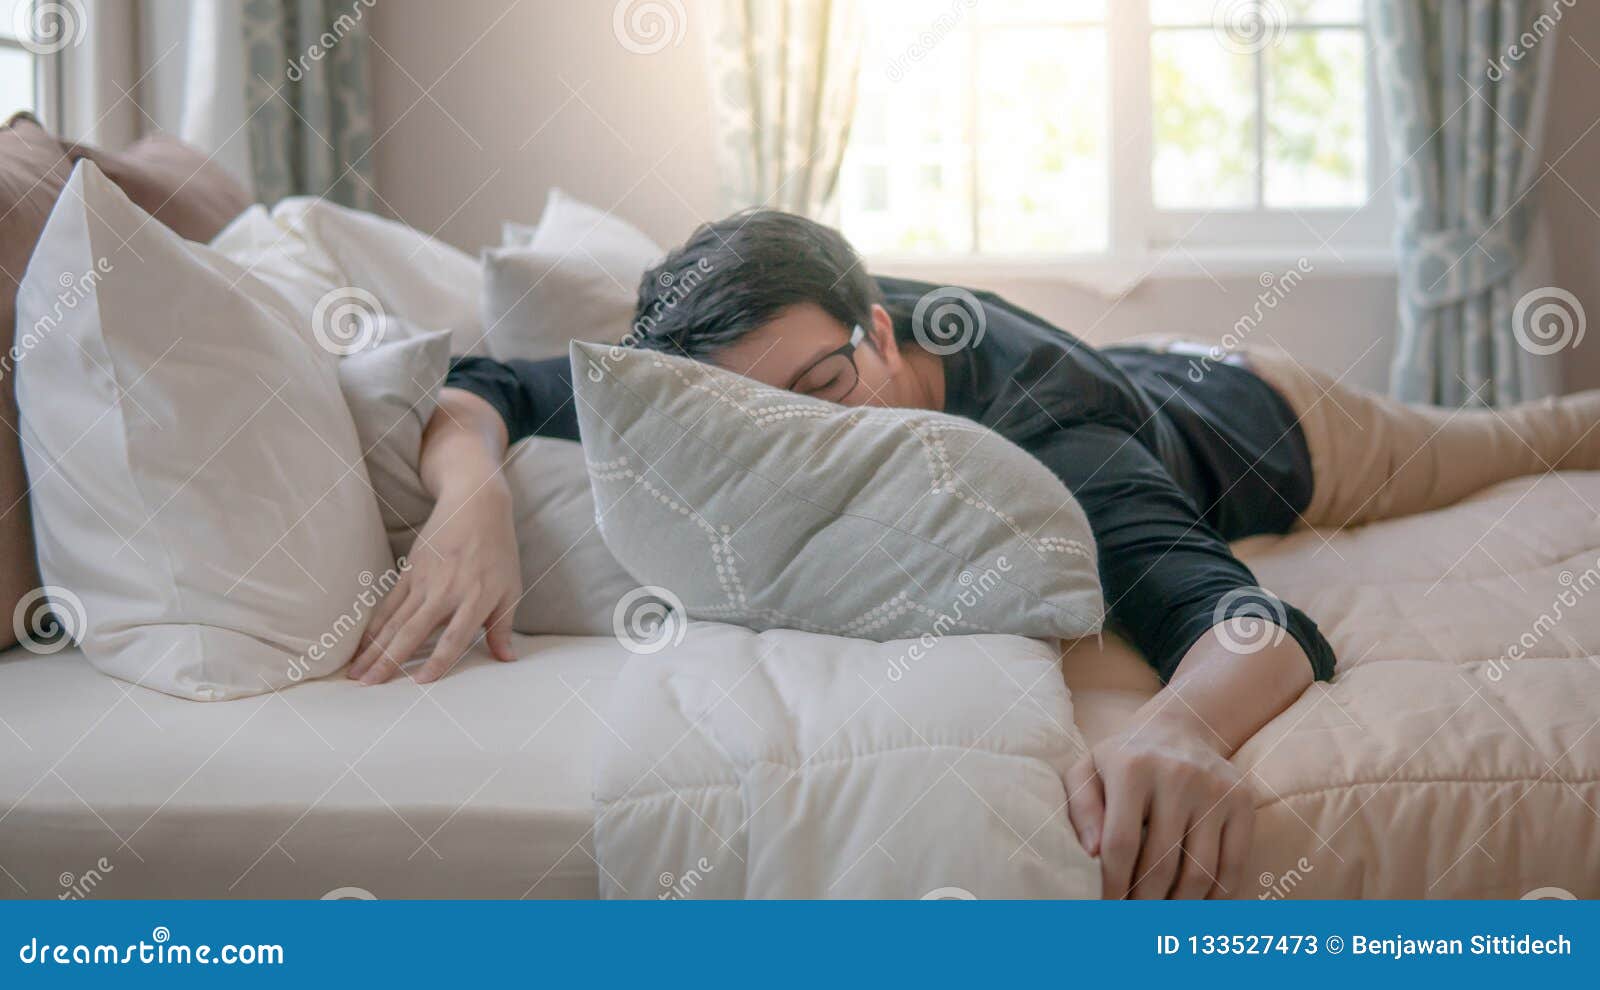 Asian Man Sleeping on Bed in Bedroom Stock Image - Image of healthcare ...